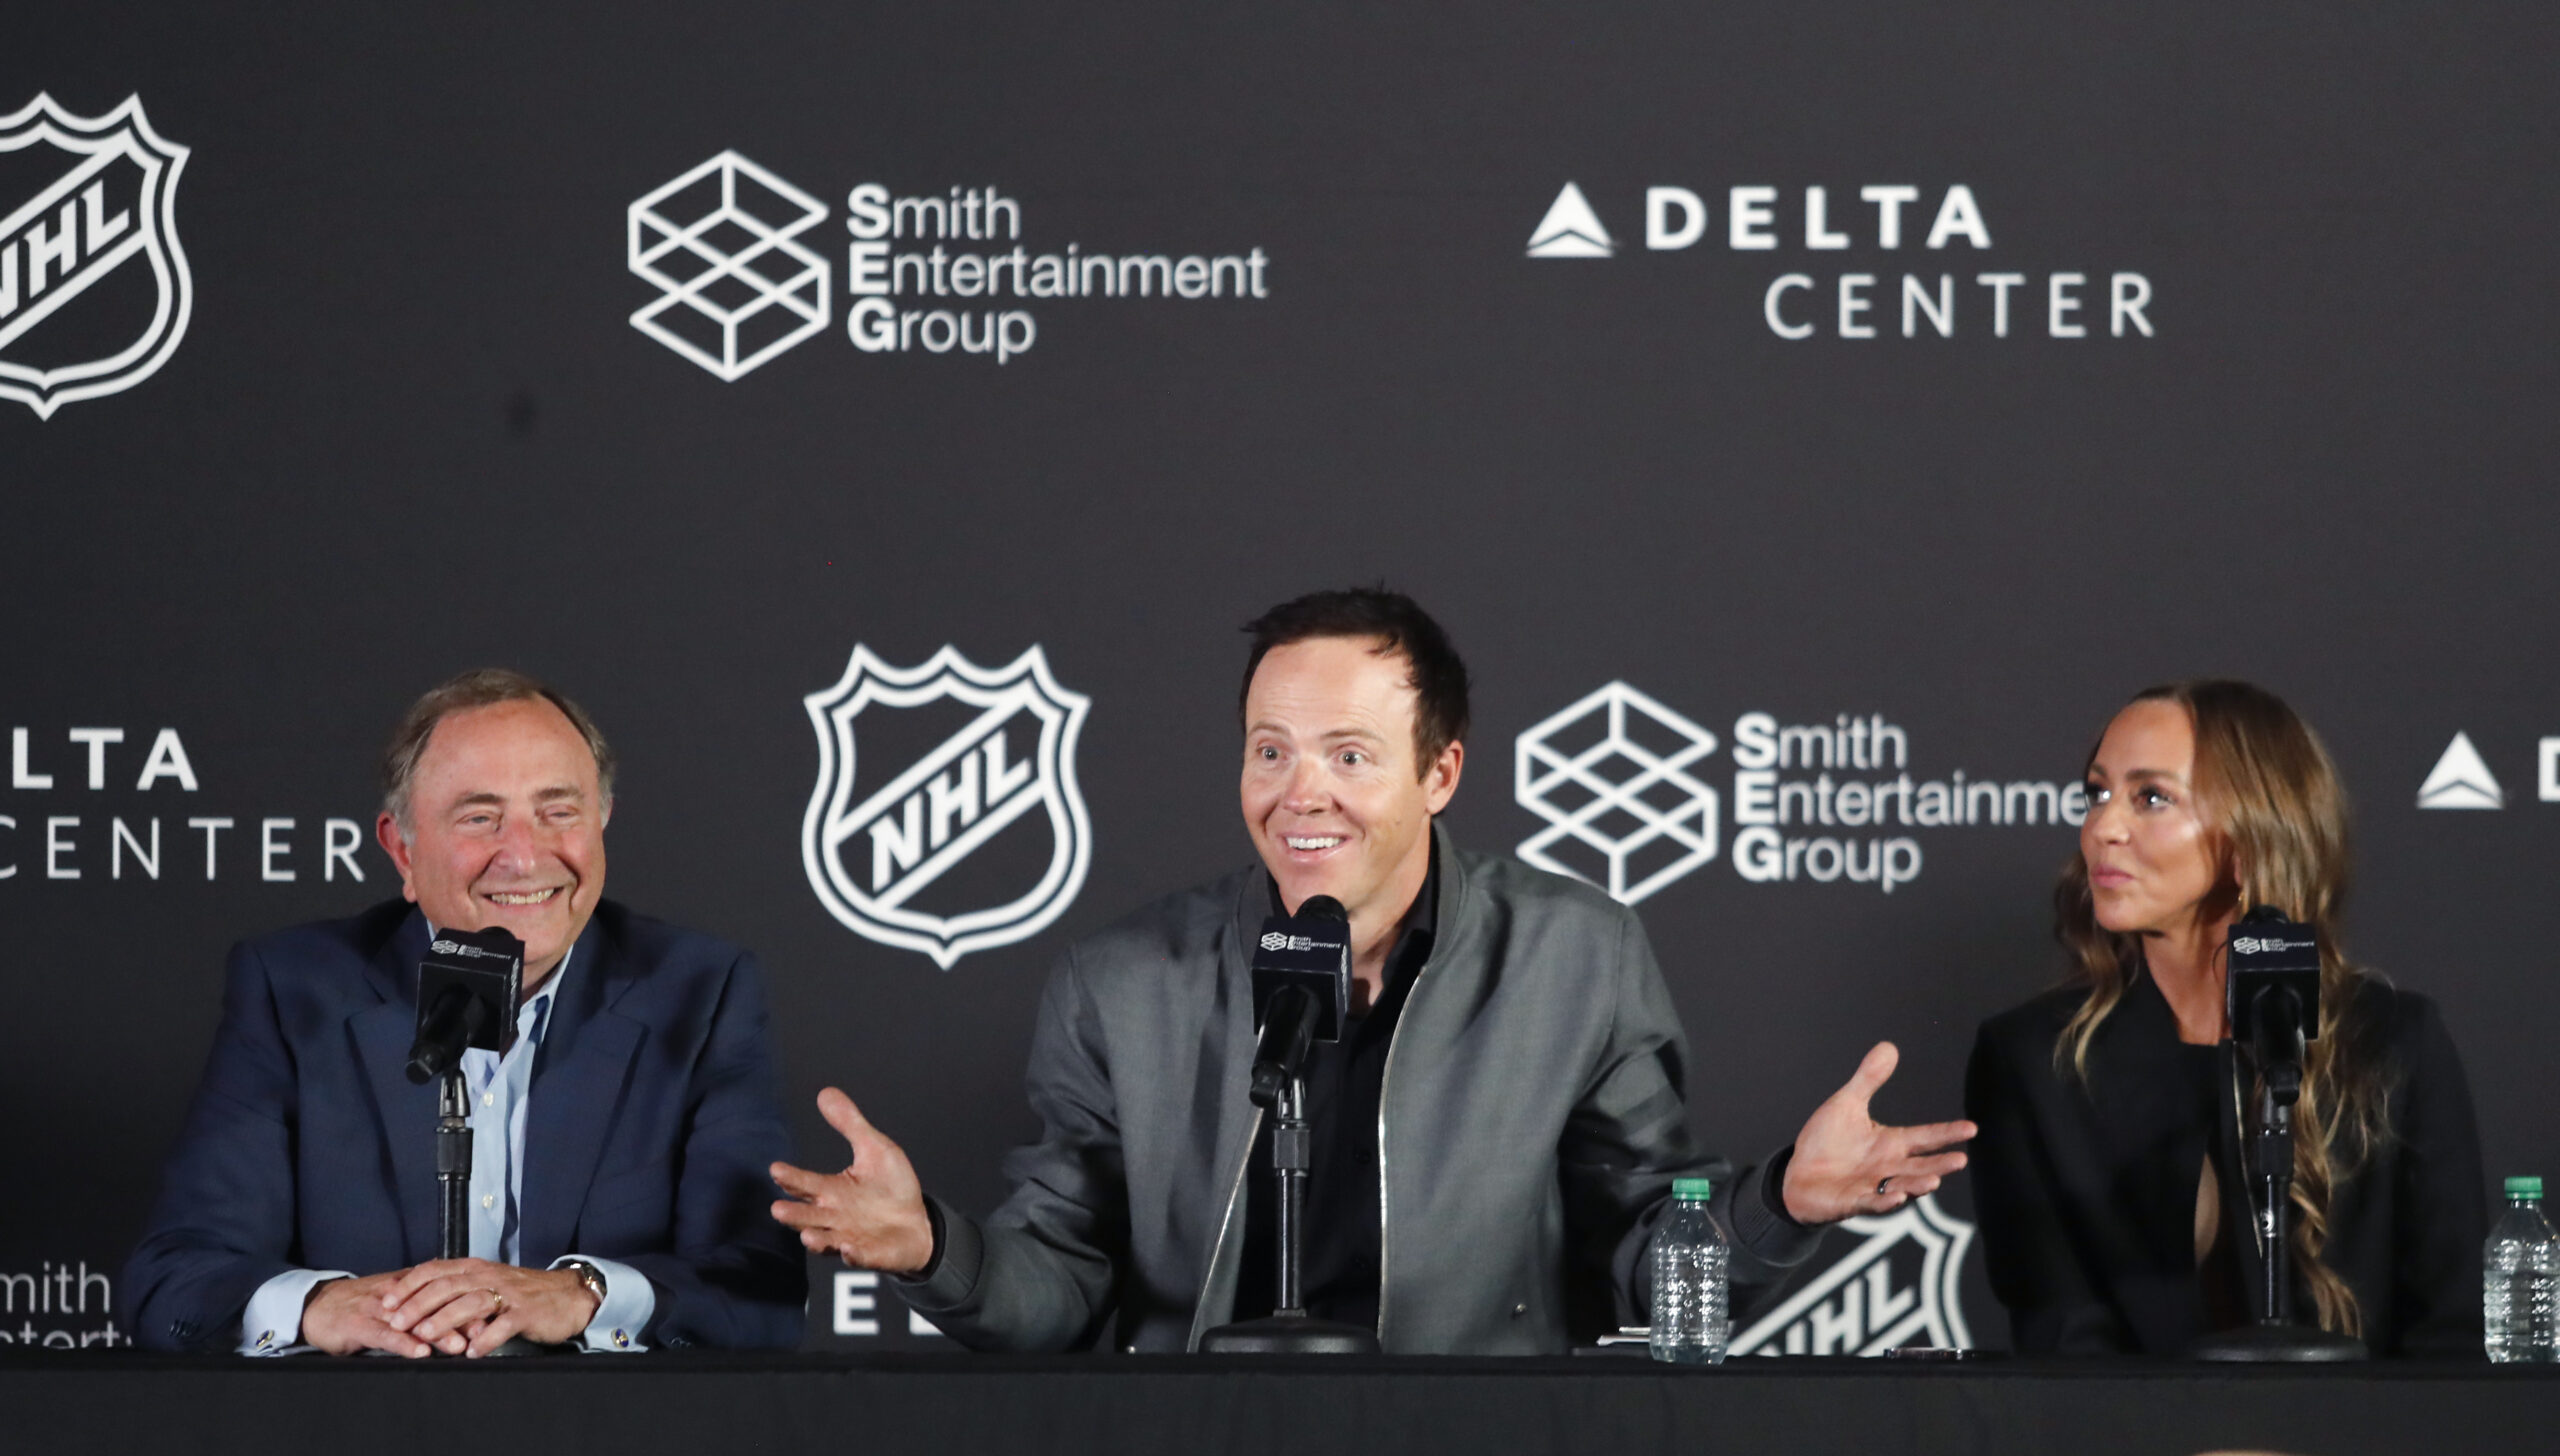 NHL Commissioner Gary Bettman and Ashley Smith smile as team owner Ryan Smith gestures during a news conference. The NHL has allowed the sale of the Arizona Coyotes and the team will relocate to Salt Lake City, Utah. (Getty)